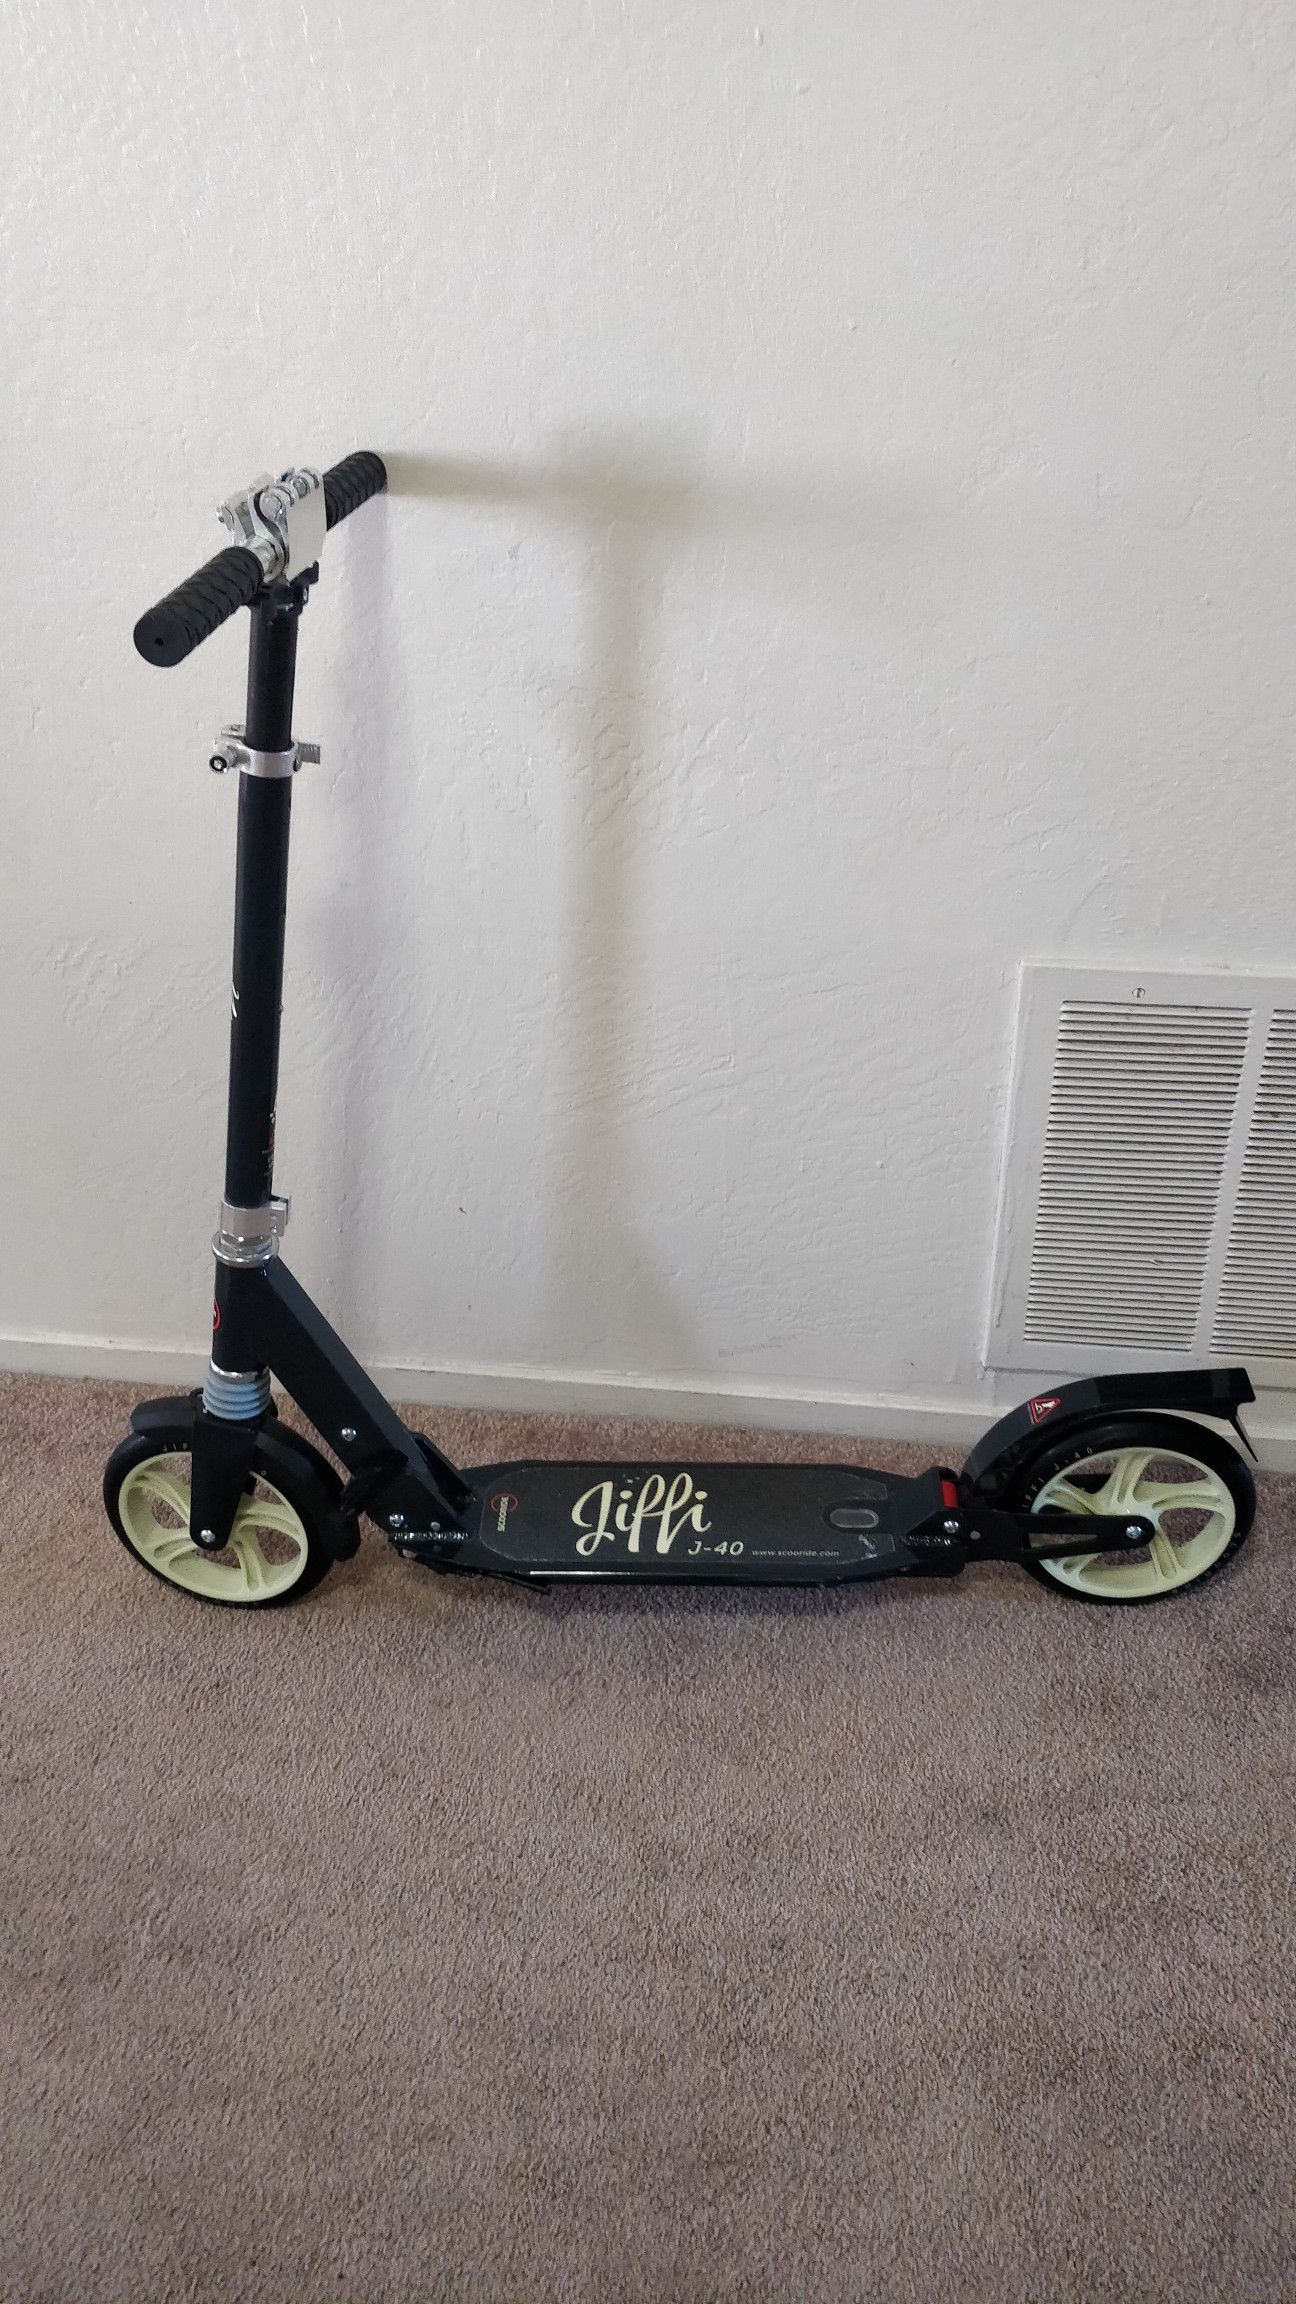 J-40 kick scooter for adults